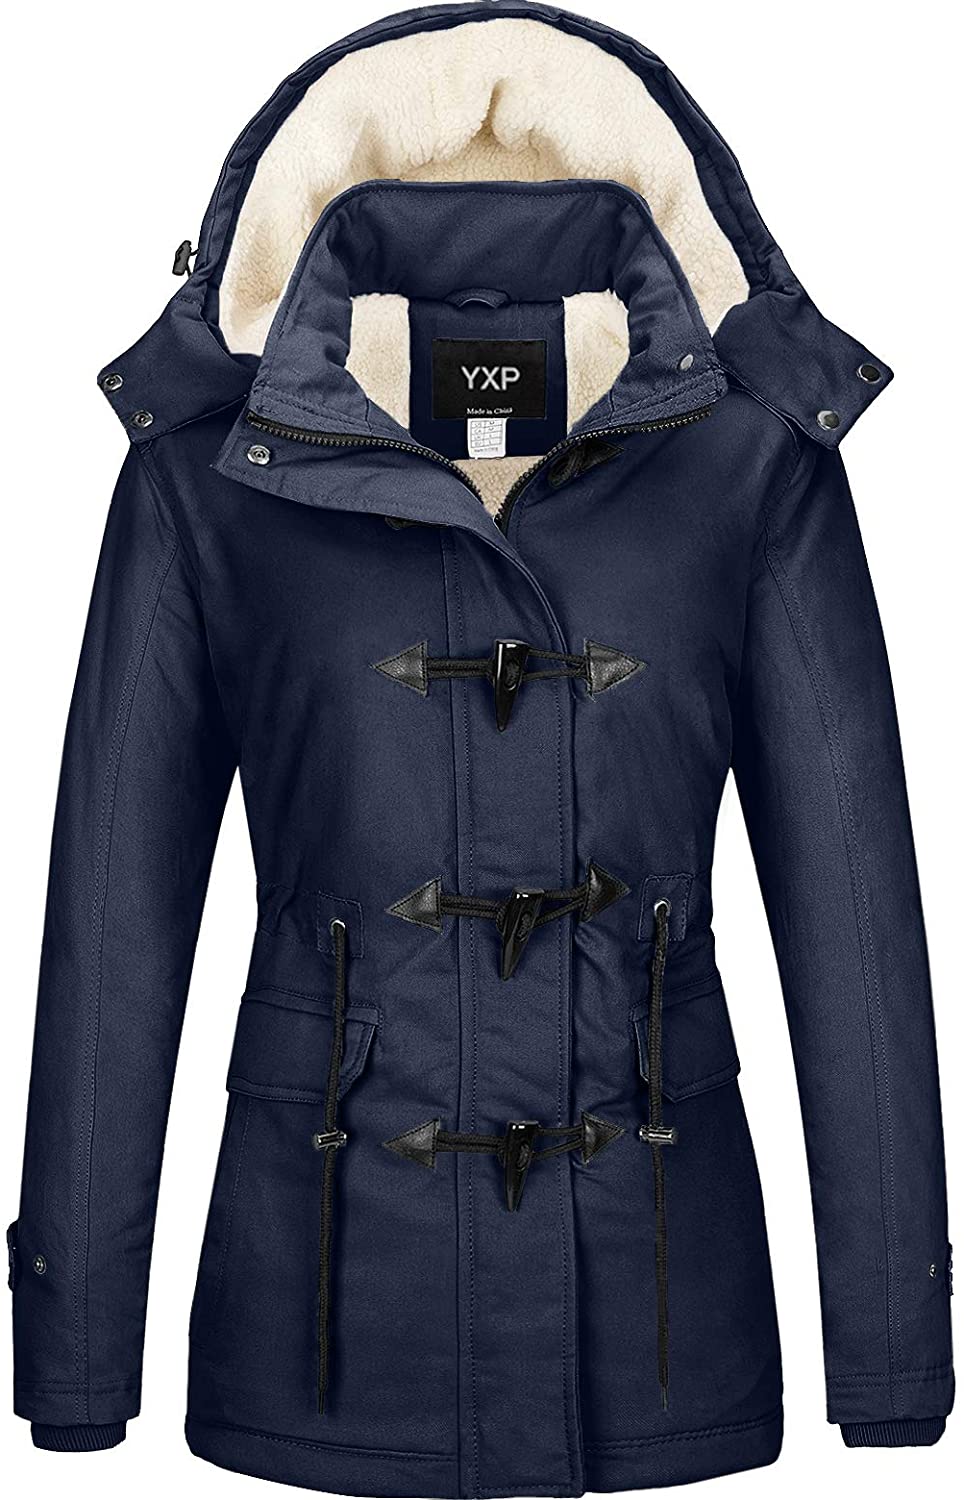 JYG Men's Winter Thicken Coat Casual Military Parka Jacket with Removable  Hood